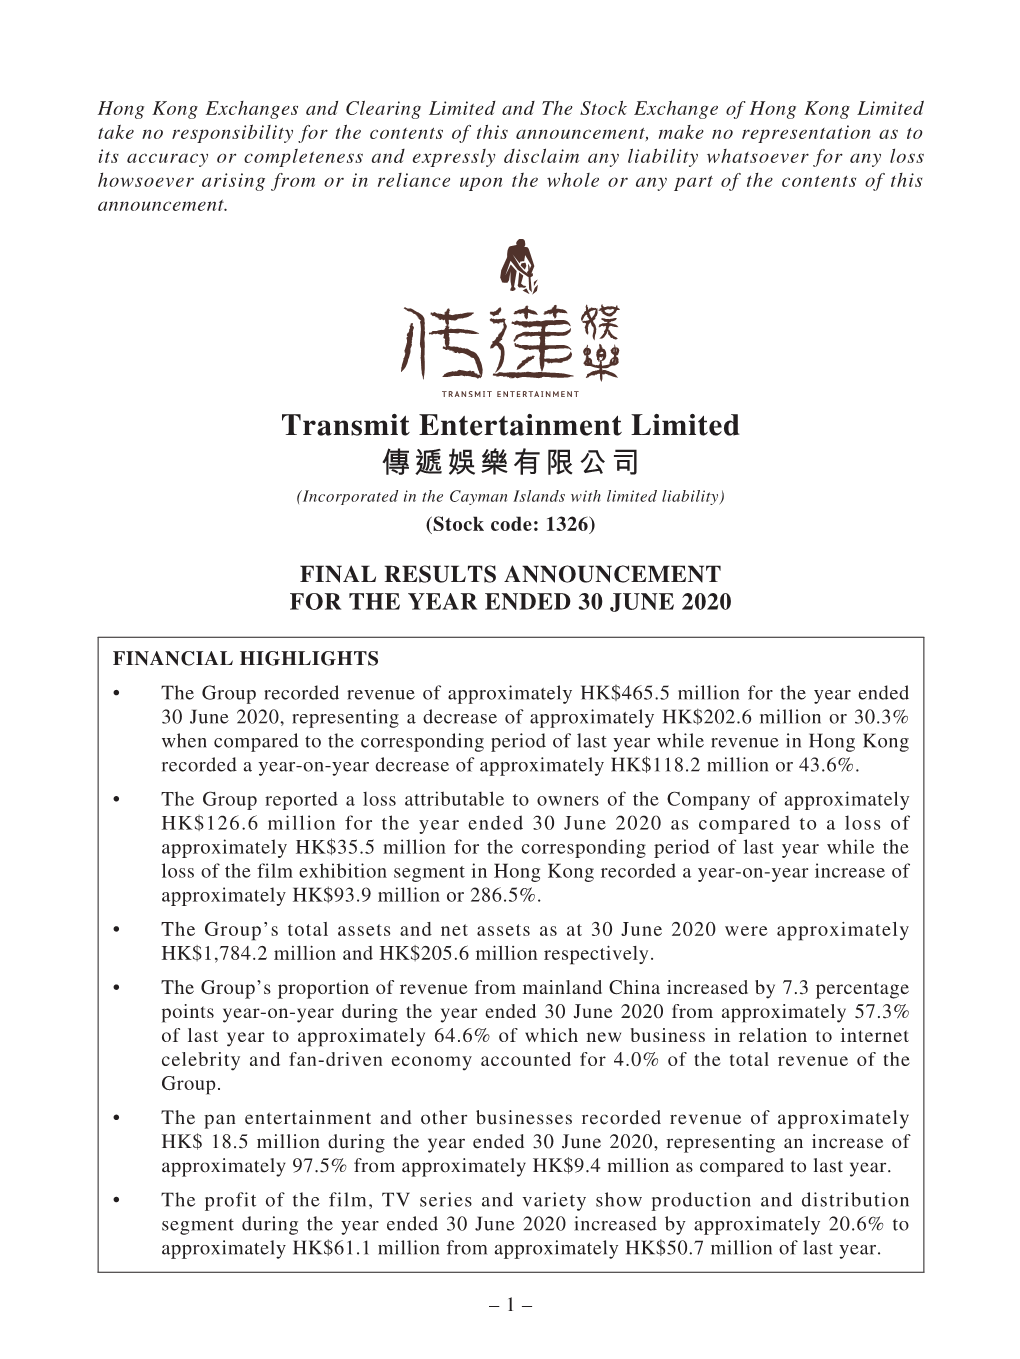 Transmit Entertainment Limited 傳遞娛樂有限公司 (Incorporated in the Cayman Islands with Limited Liability) (Stock Code: 1326)